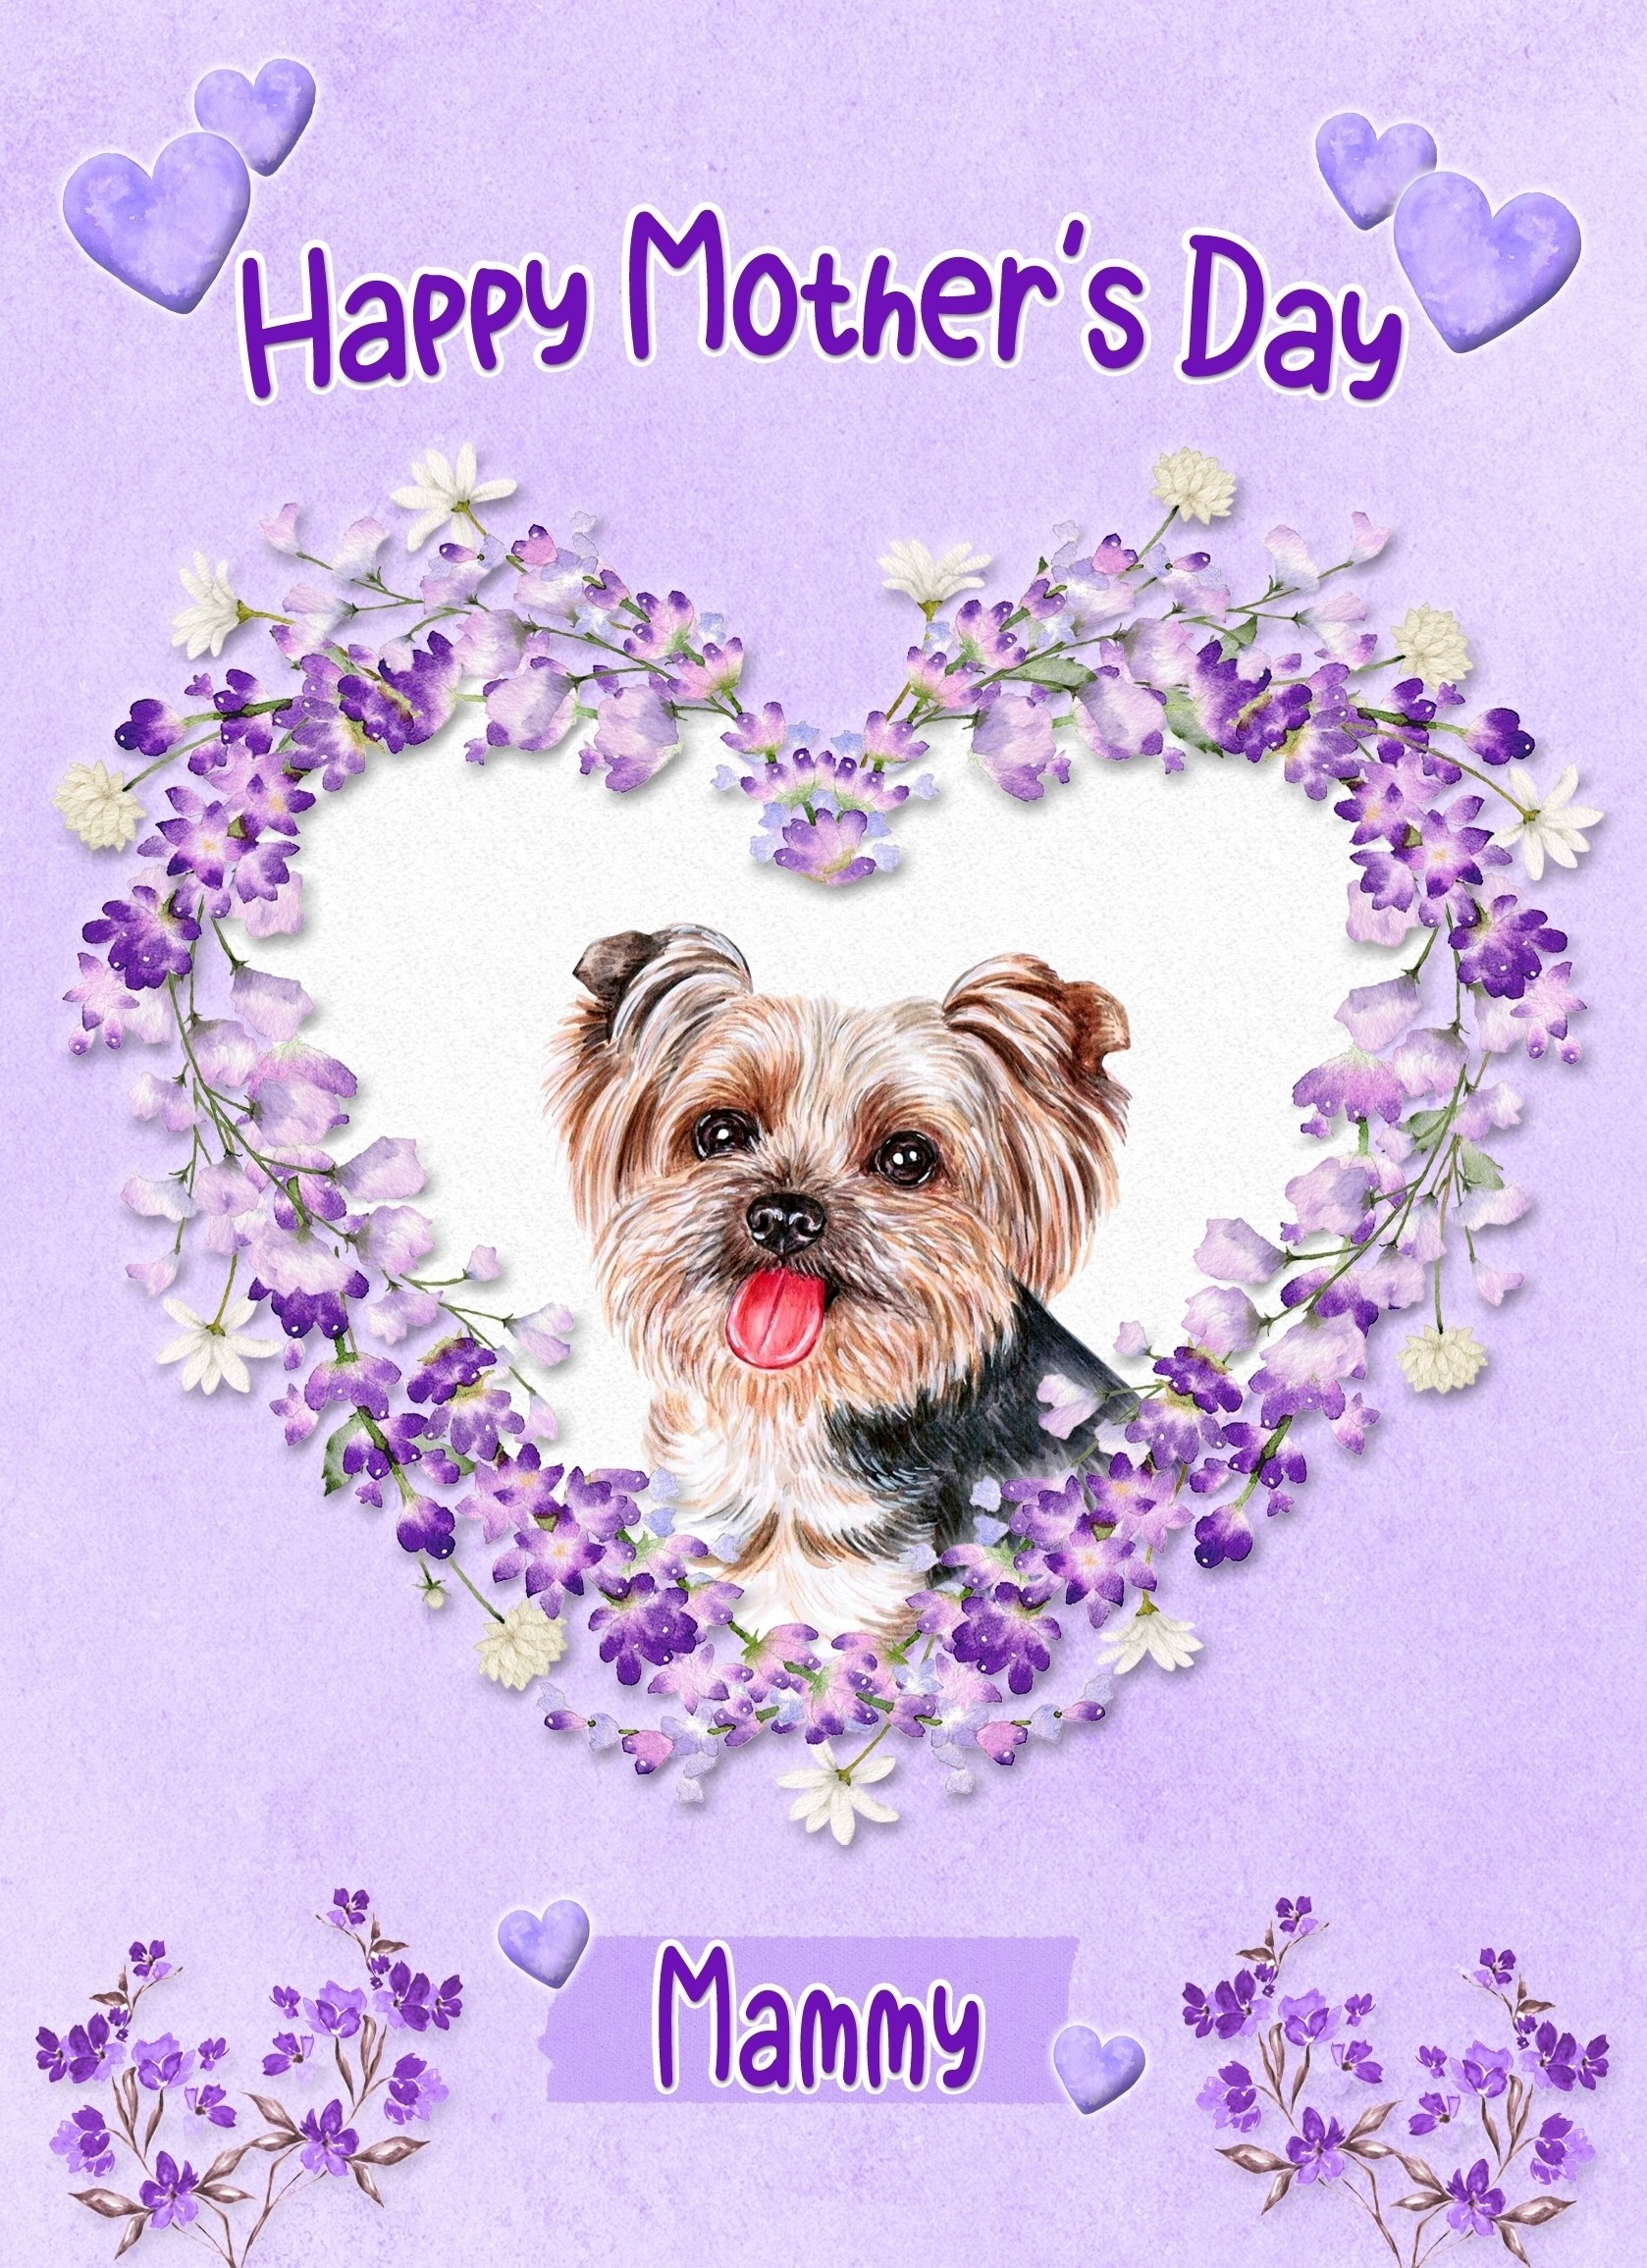 Yorkshire Terrier Dog Mothers Day Card (Happy Mothers, Mammy)